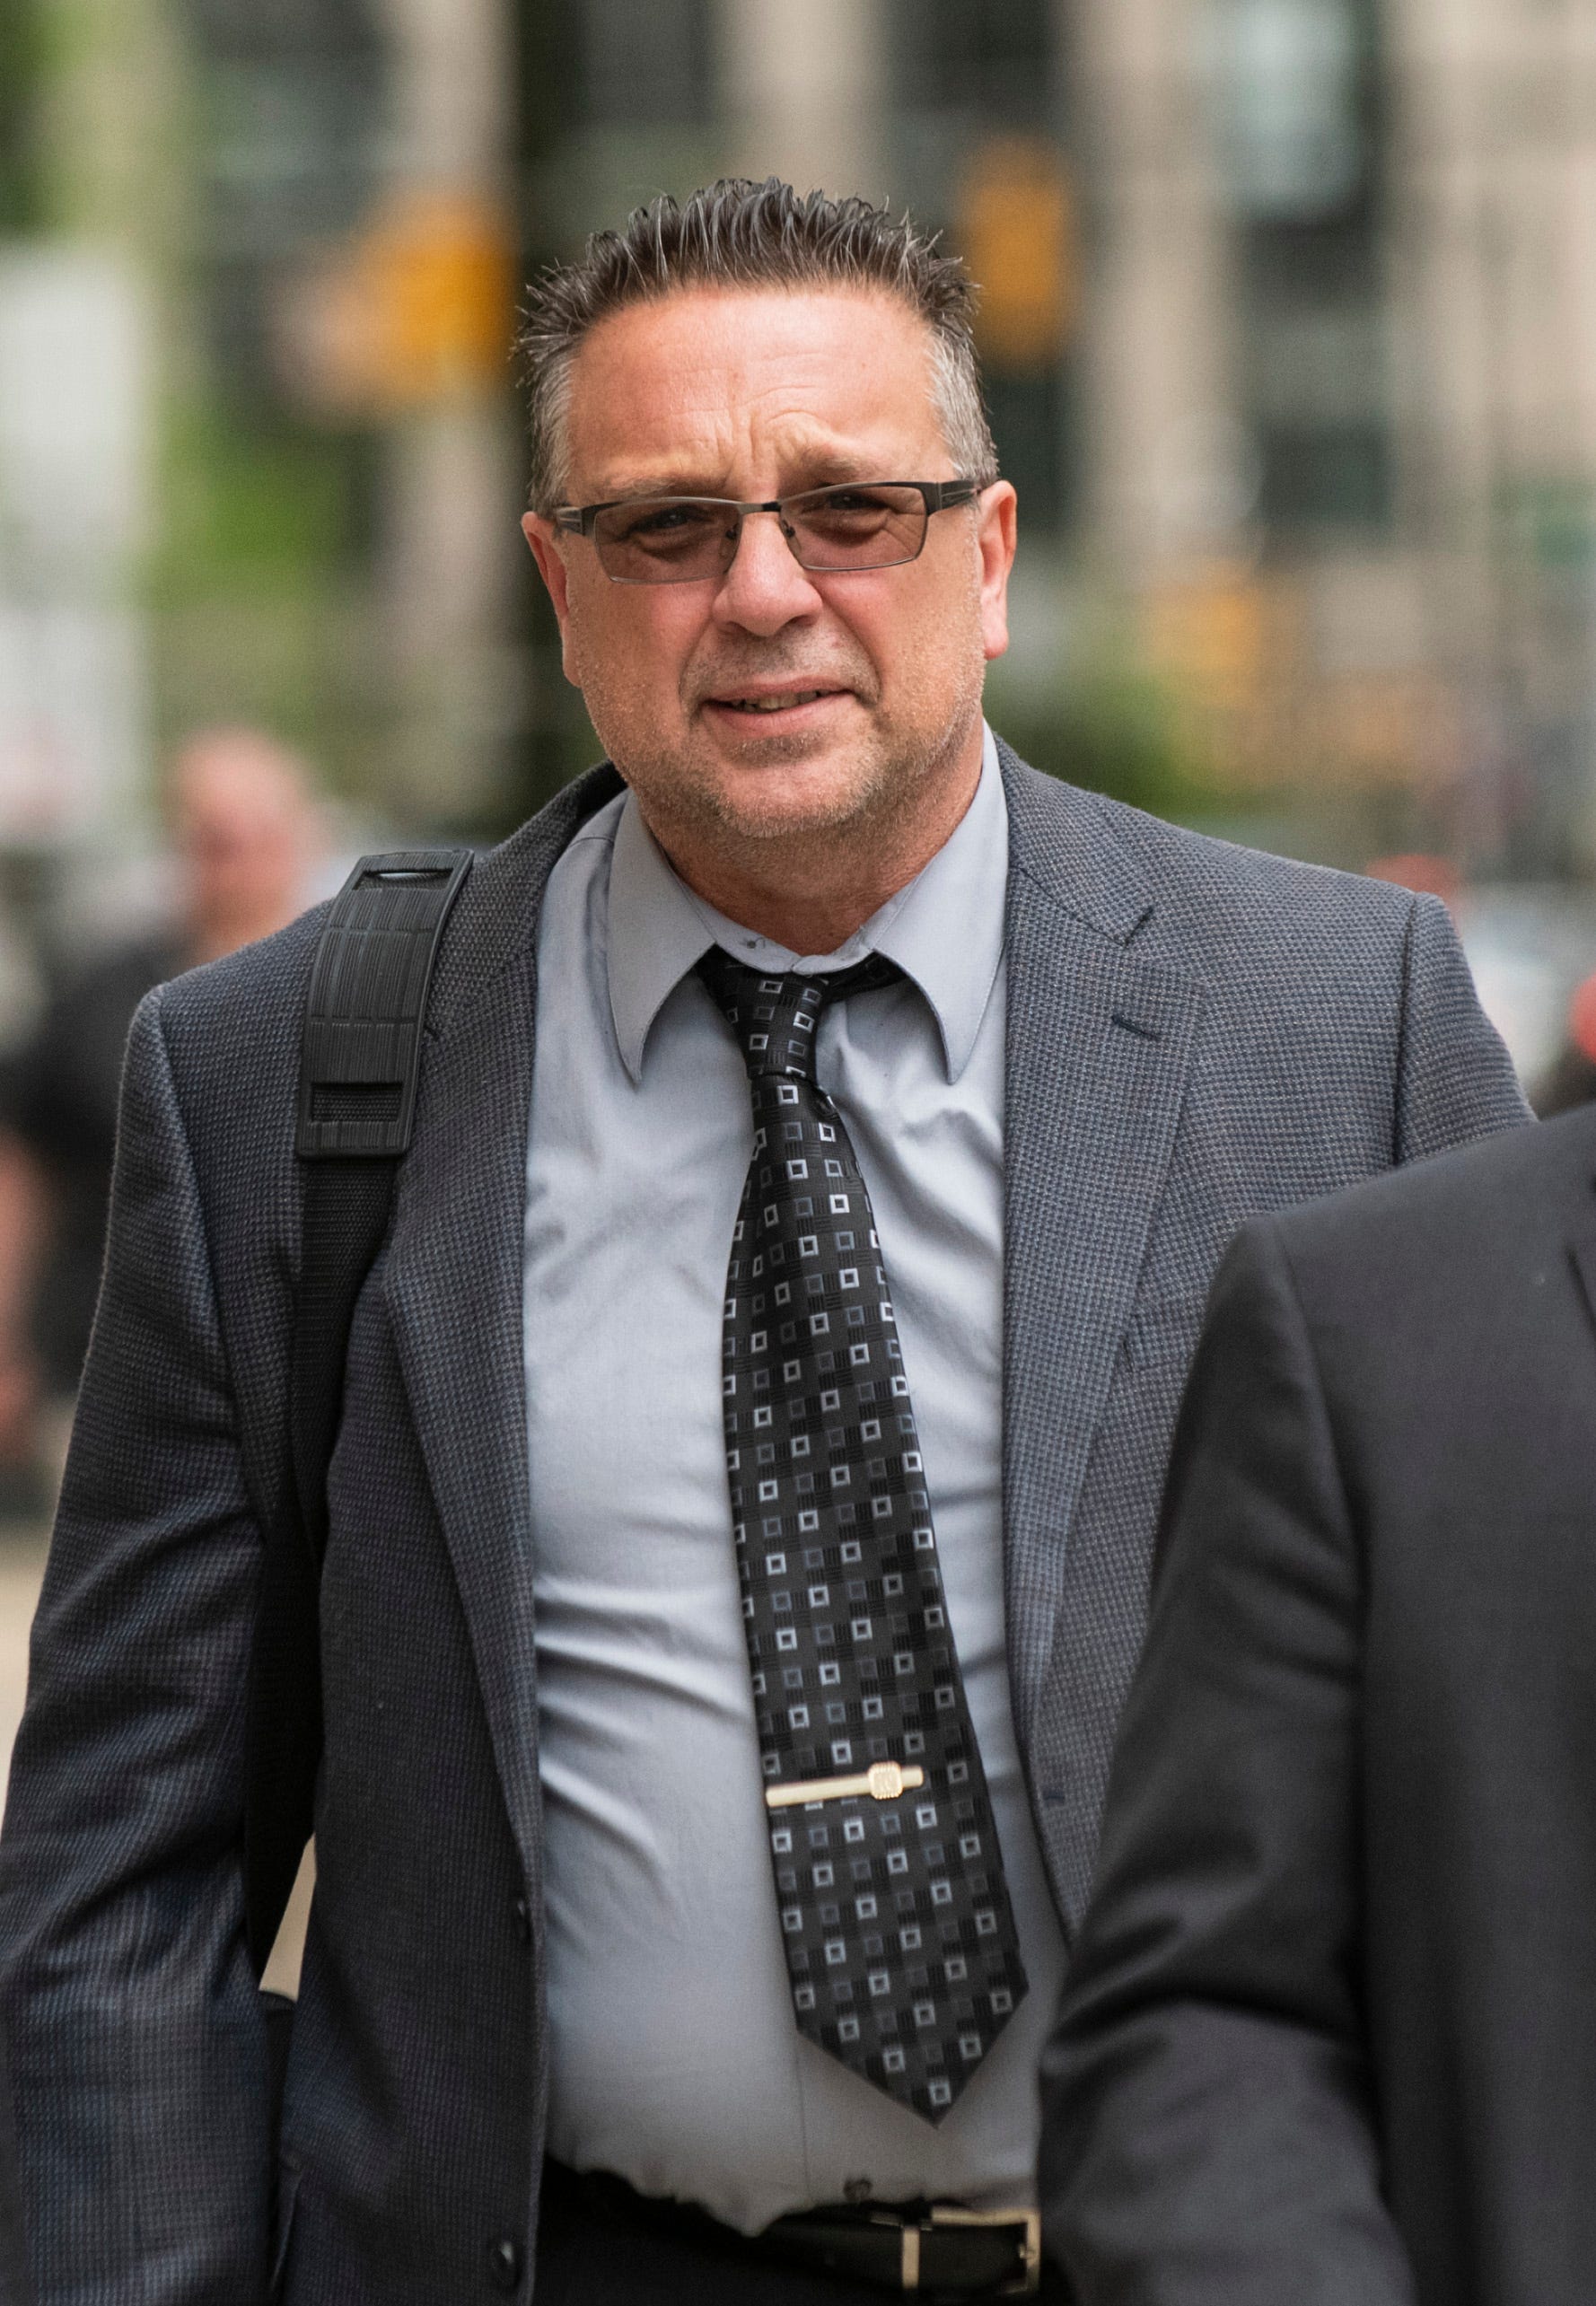 Defendant James Warner, a former field inspector at Detroit Metro Airport who is charged with taking bribes, leaves the Theodore Levin Federal Courthouse in downtown Detroit on May 21, 2019.